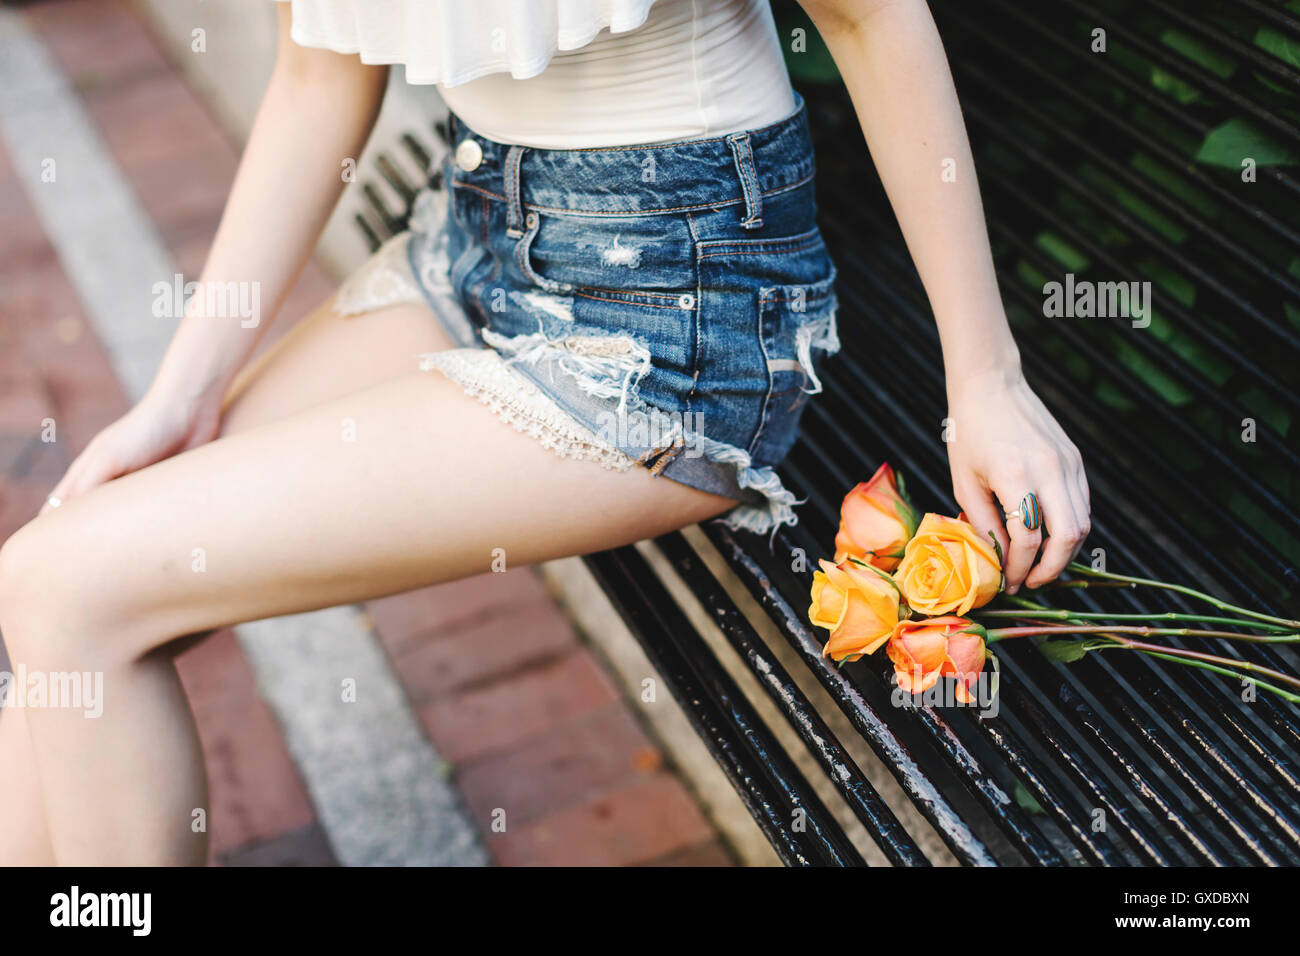 Young woman sitting on bench, roses beside her, mid section Stock Photo